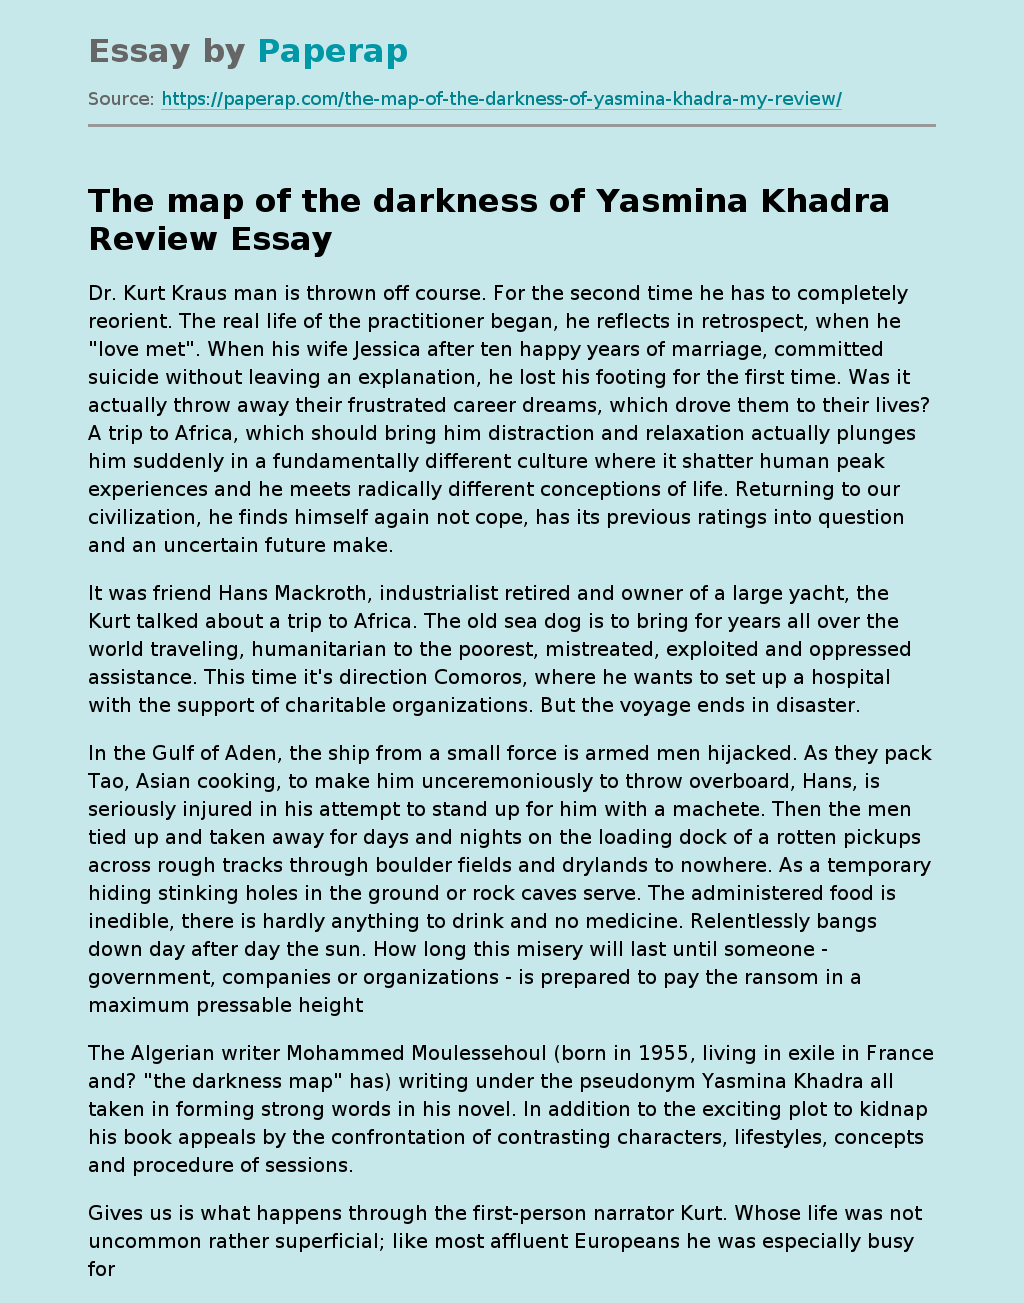 The map of the darkness of Yasmina Khadra Review